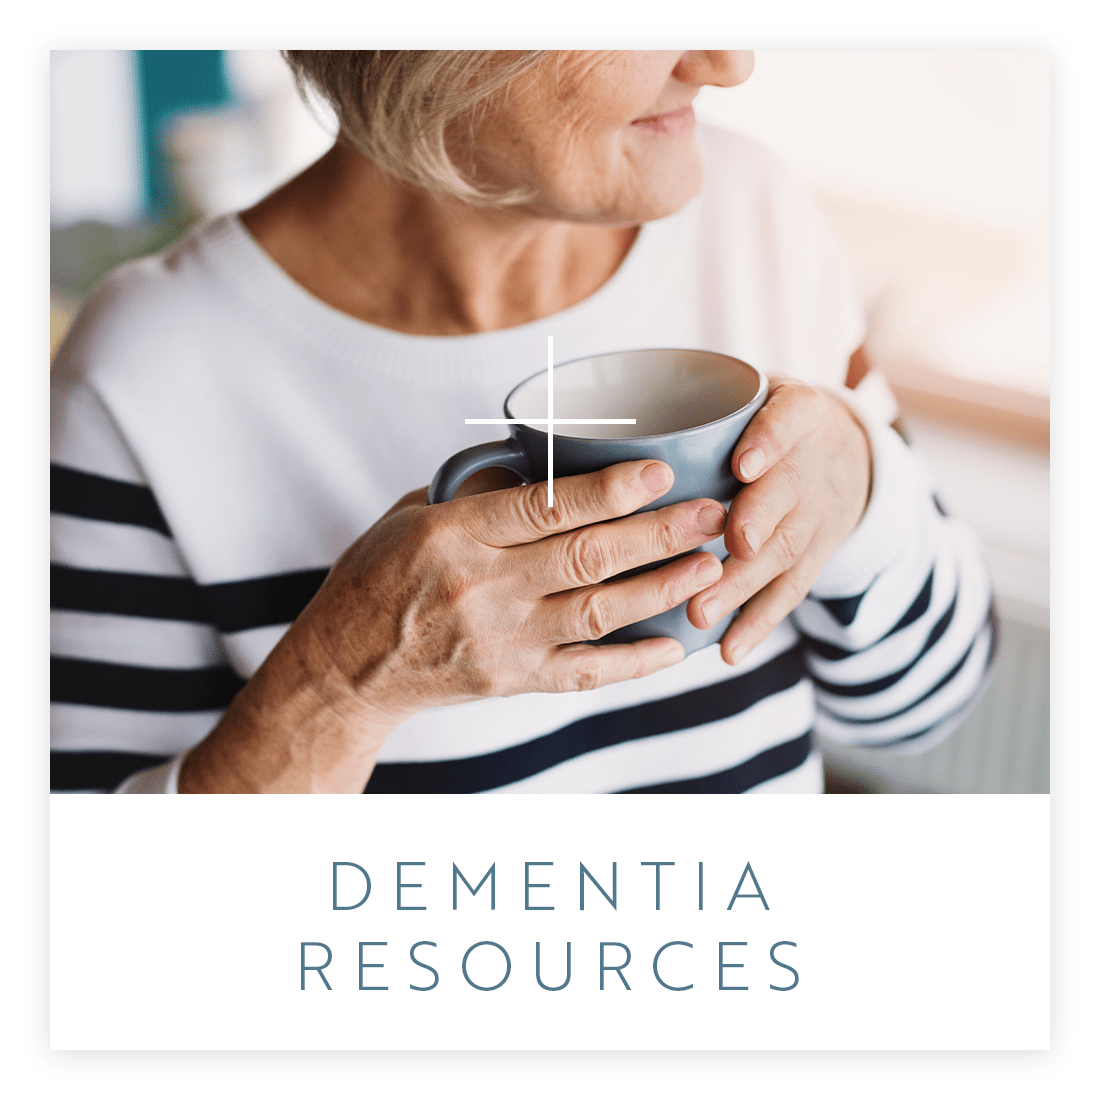 Learn about Dementia Resources at Estancia Senior Living in Fallbrook, California